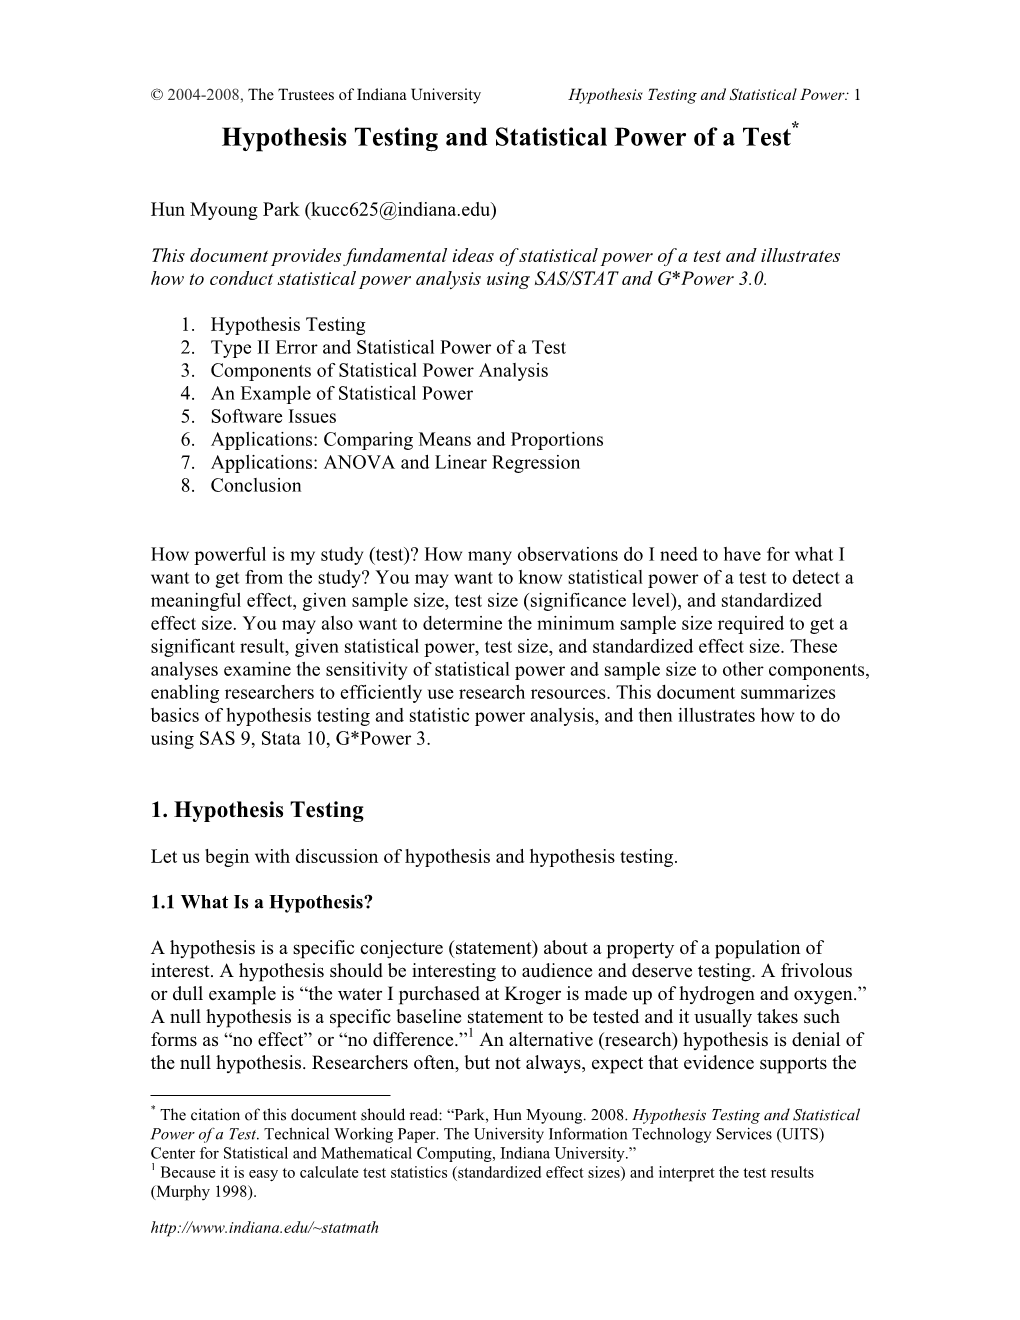 Hypothesis Testing and Statistical Power of a Test*